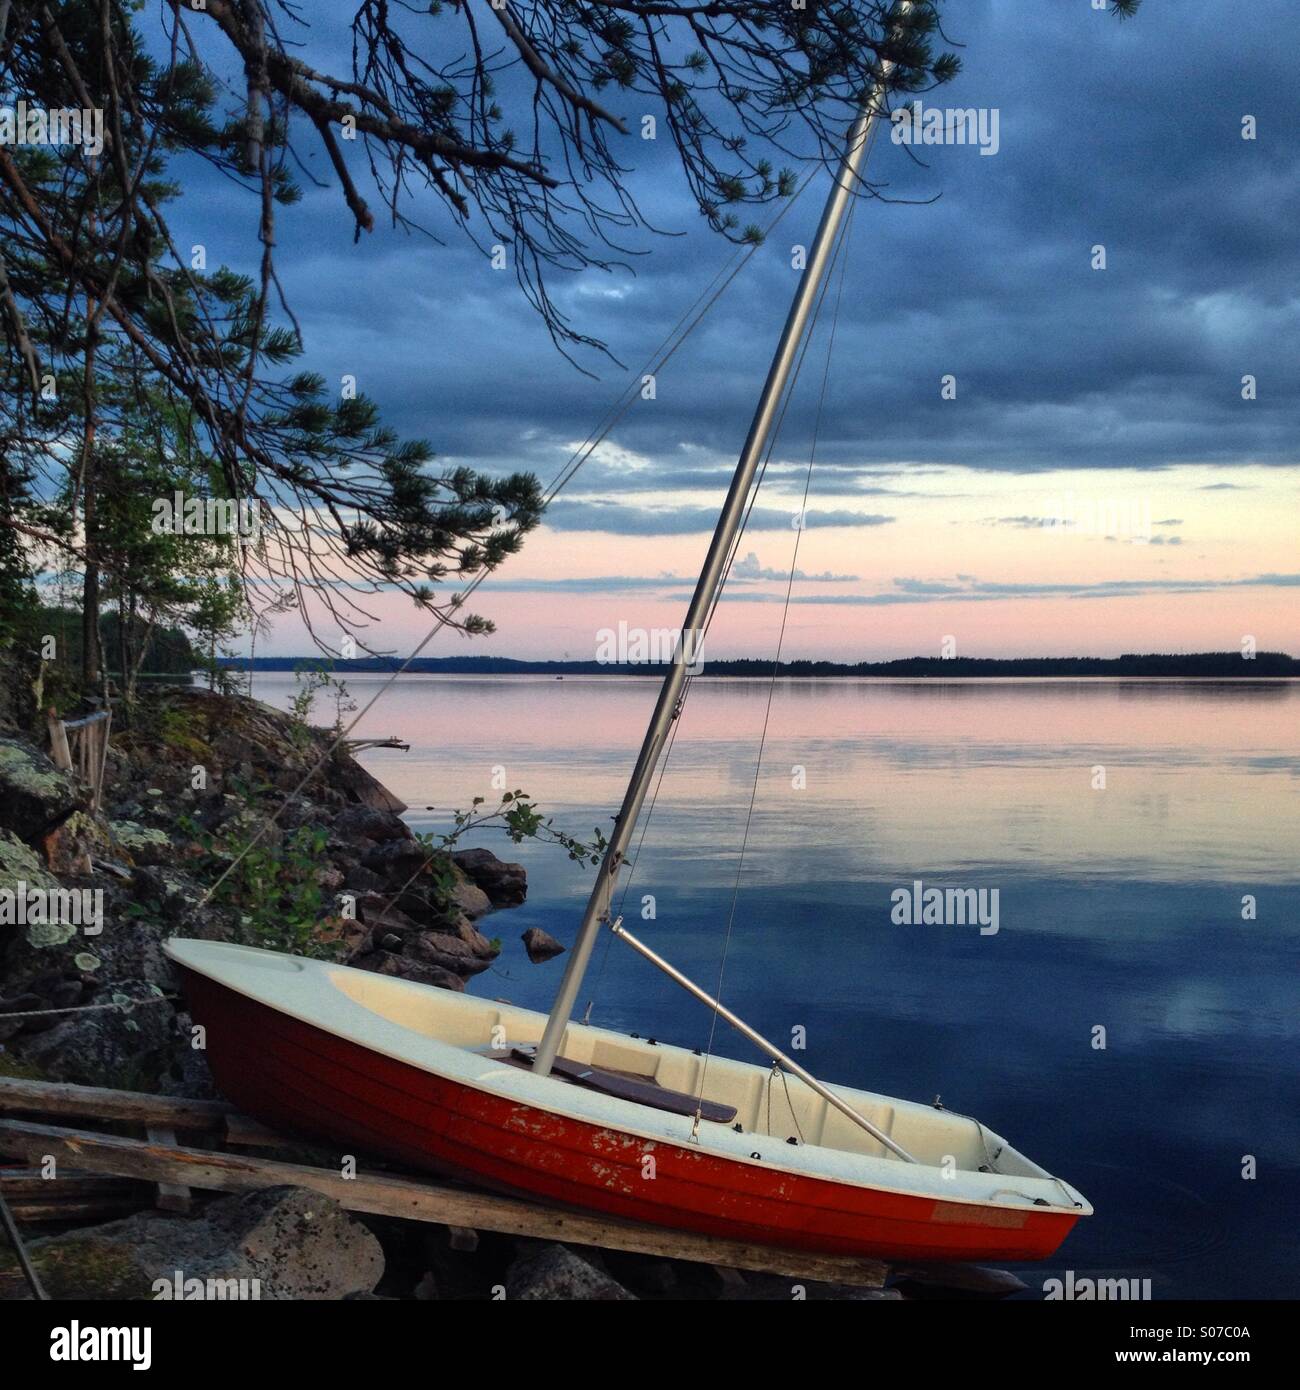 A boat drawn up on a mooring at a North Finland Nordic summerhouse lake in the Arctic Summer midnight sun Stock Photo